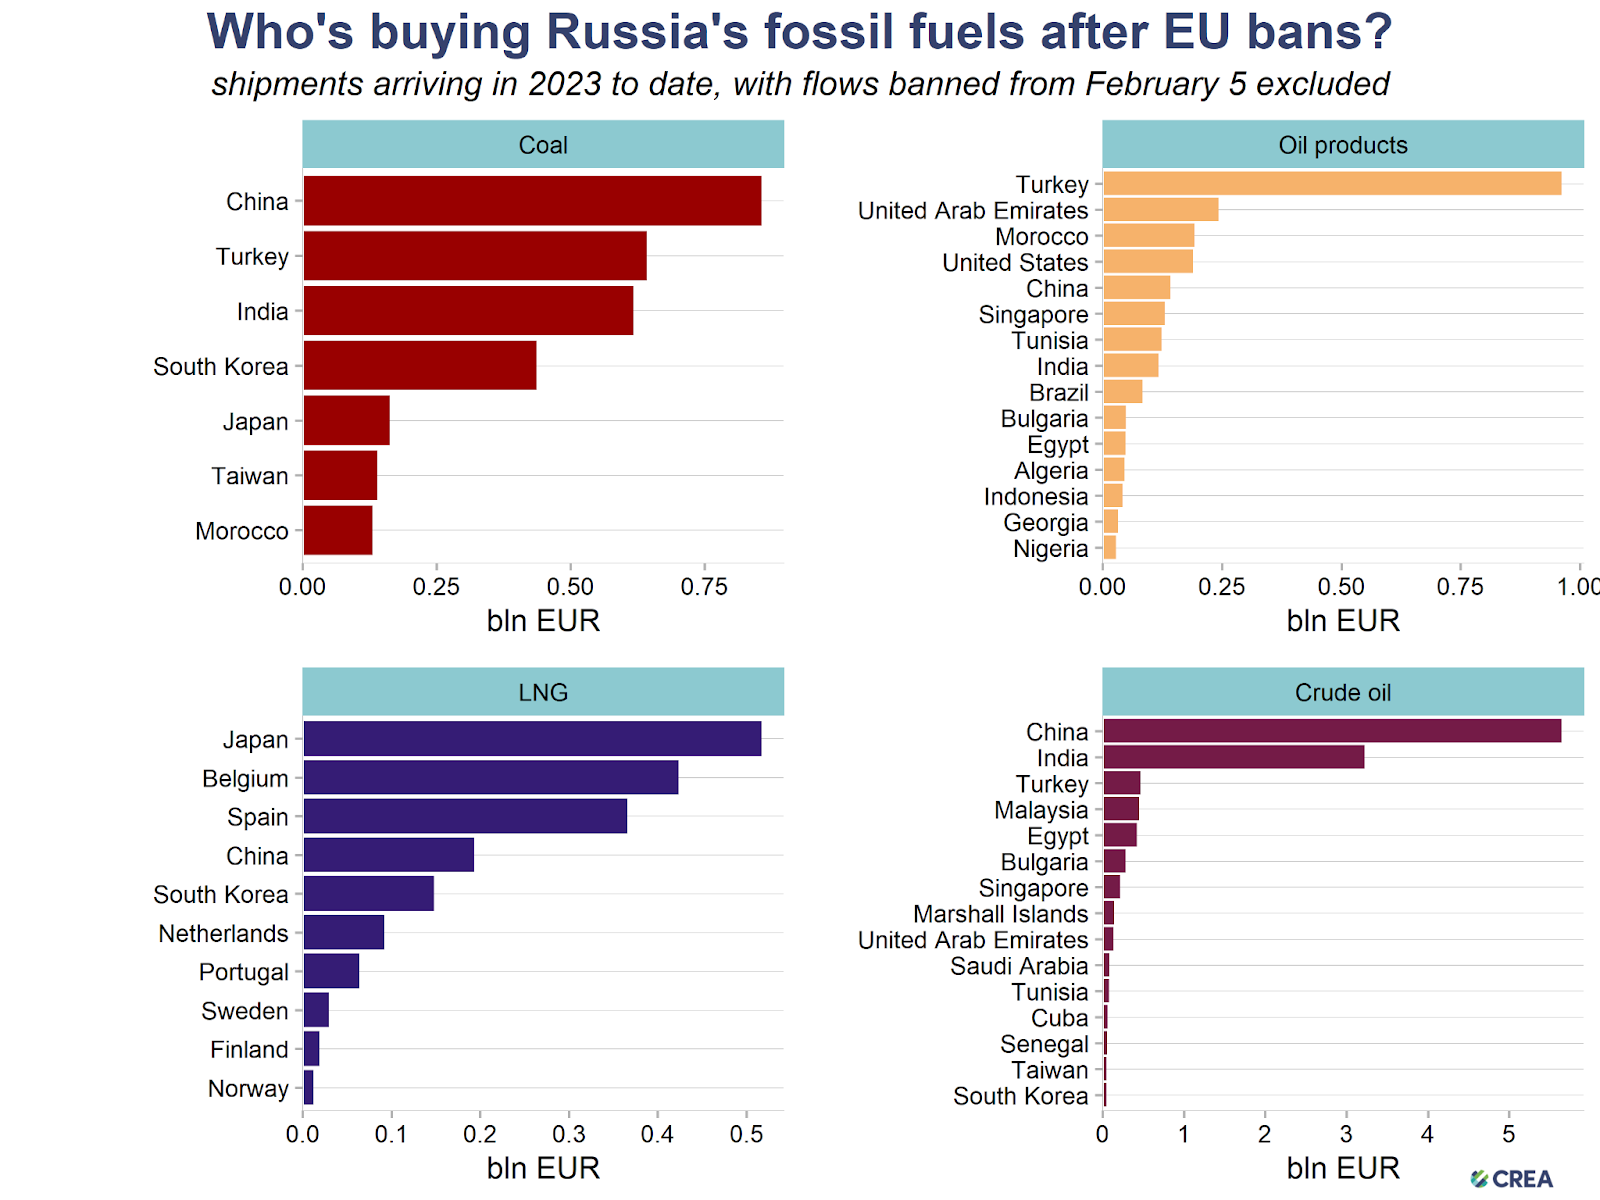 Who Buys Russian Fossil Fuels After the EU Bans, Source: CREA